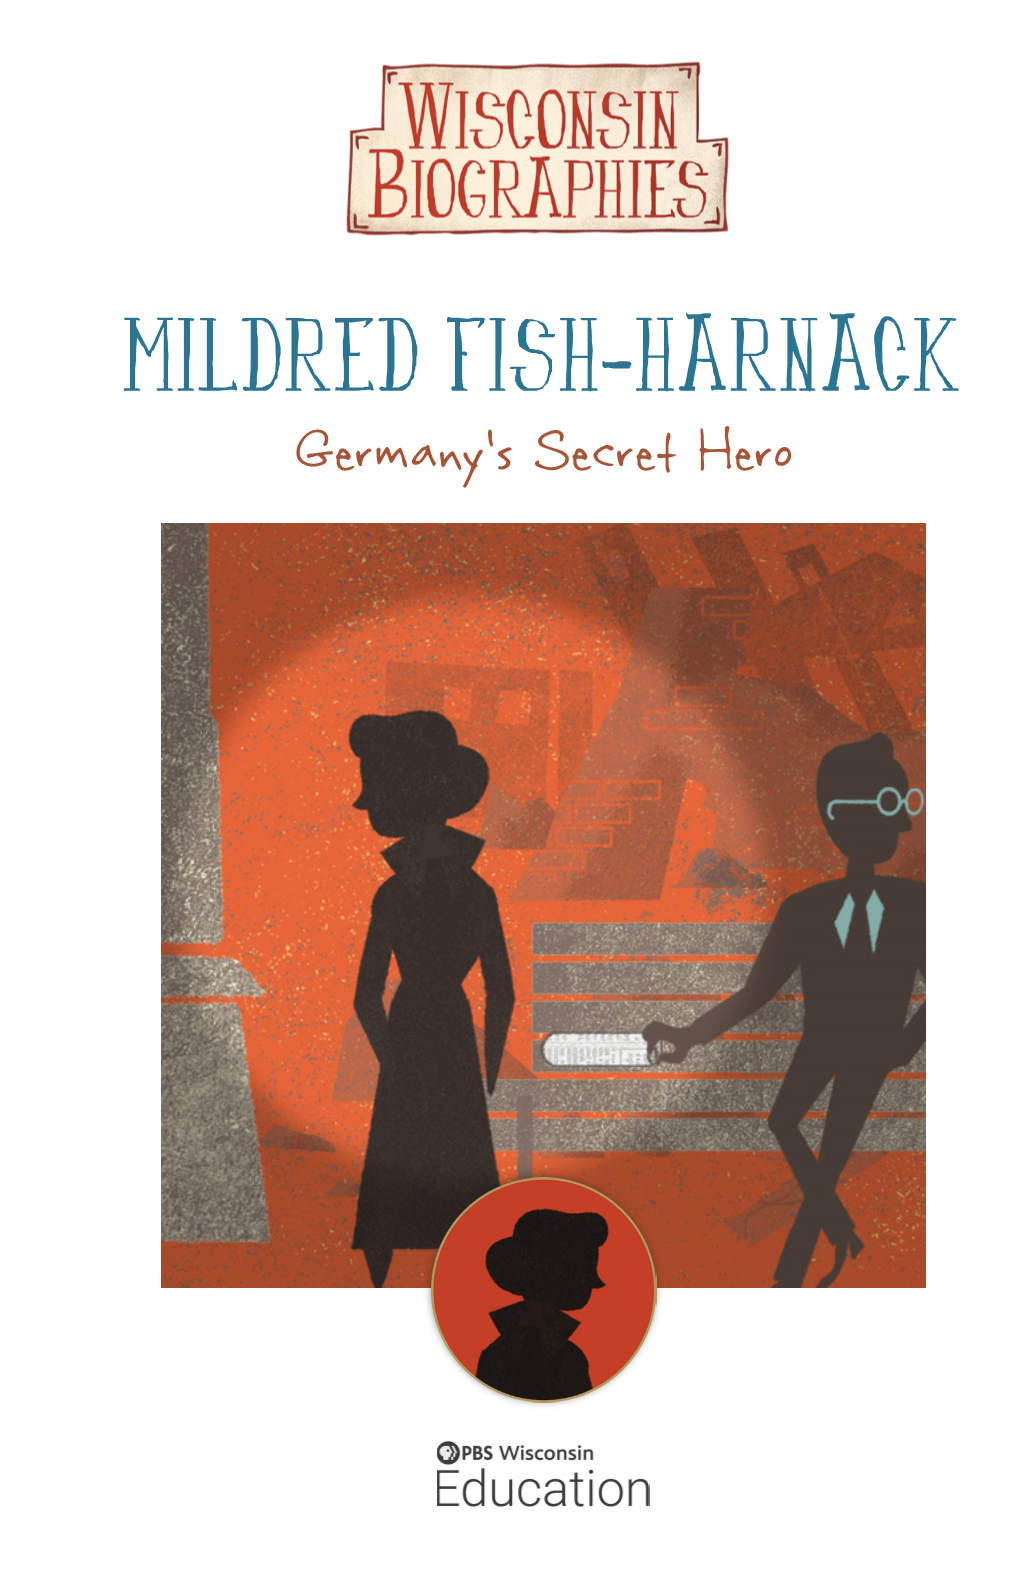 Mildred Fish-Harnack Germany’S Secret Hero Biography Written By